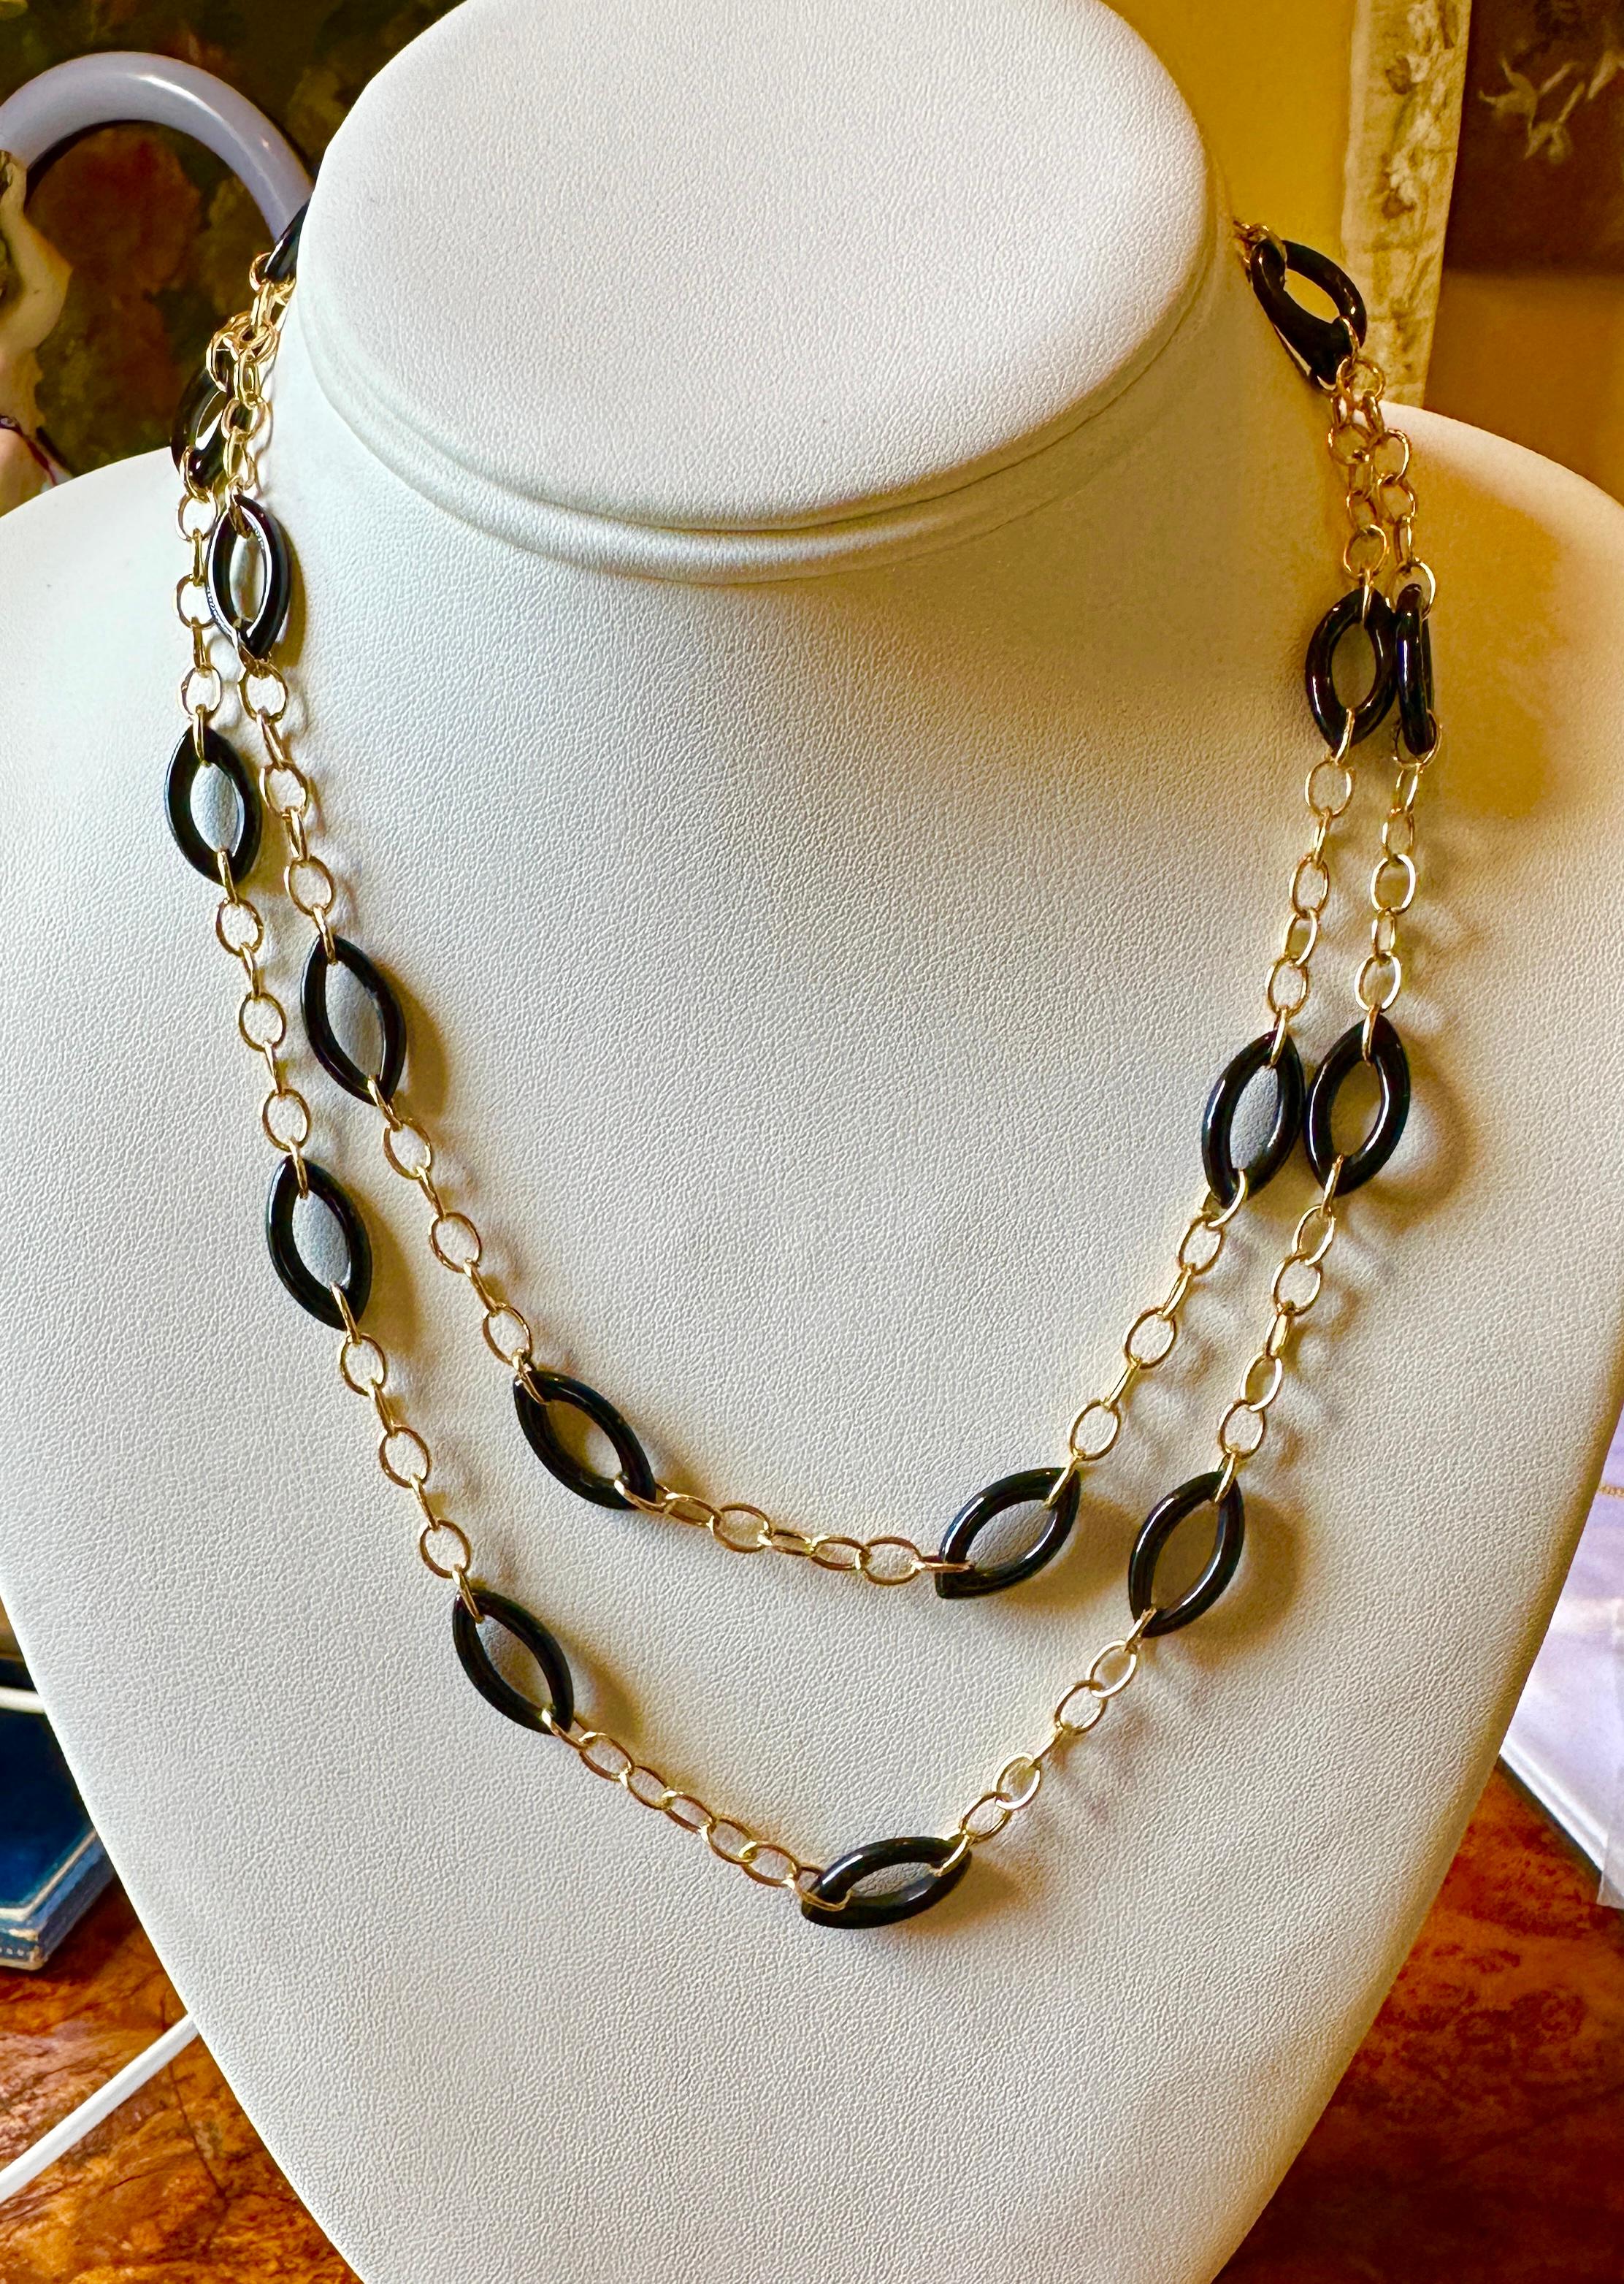 Indulge in this Black Coral and 14 Karat Yellow Gold Link Necklace.  The fabulous Black Coral Necklace is 36 inches long!  The stunning oval Black Coral links are interspersed with 14 Karat Yellow Gold links to create a wonderful long statement